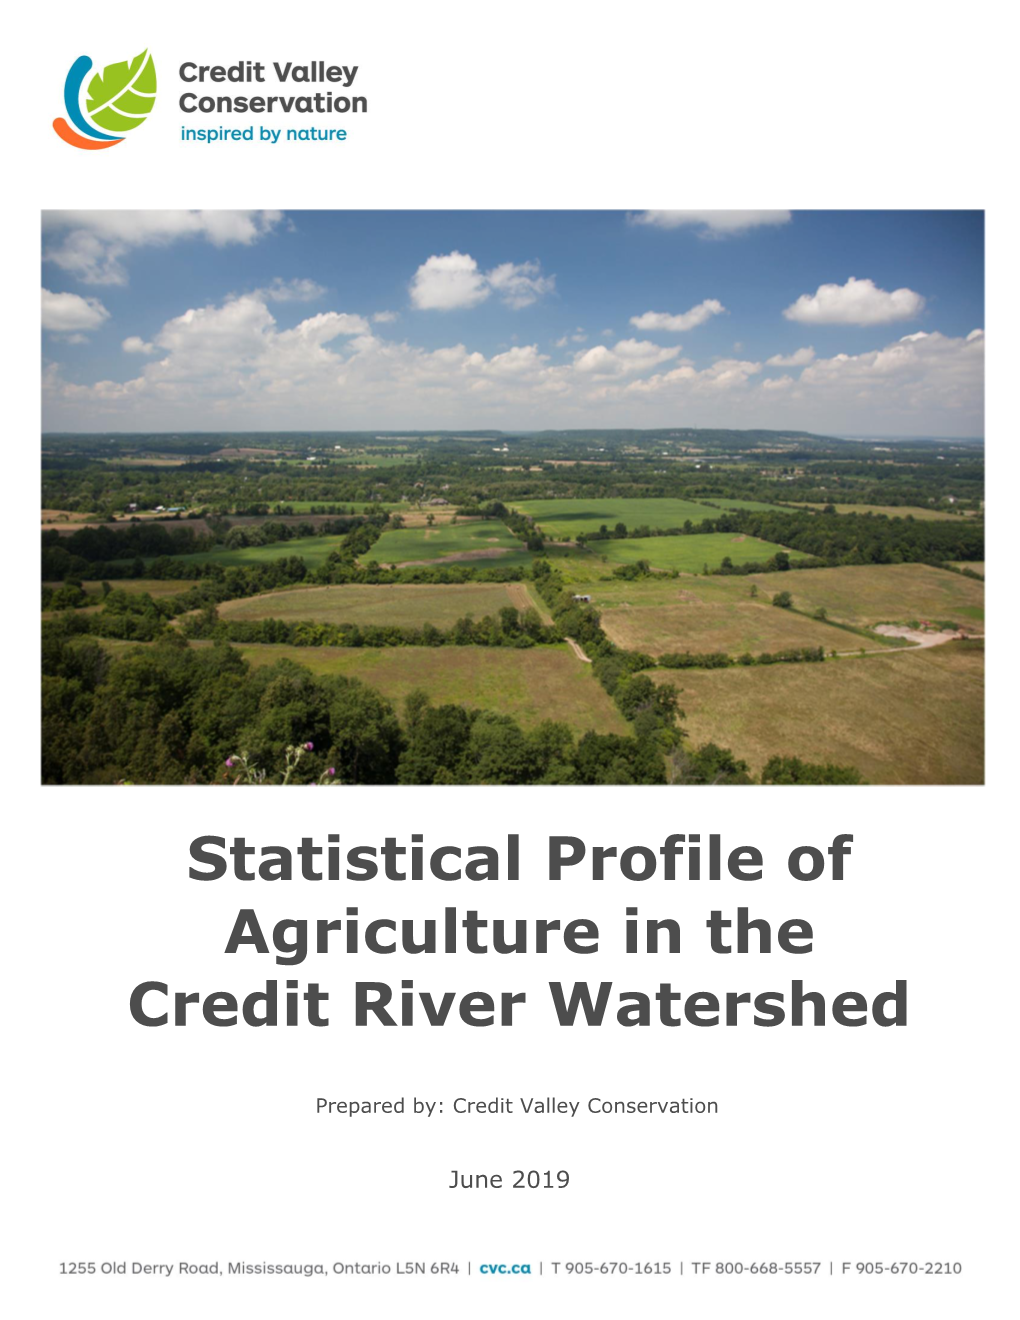 Statistical Profile of Agriculture in the Credit River Watershed